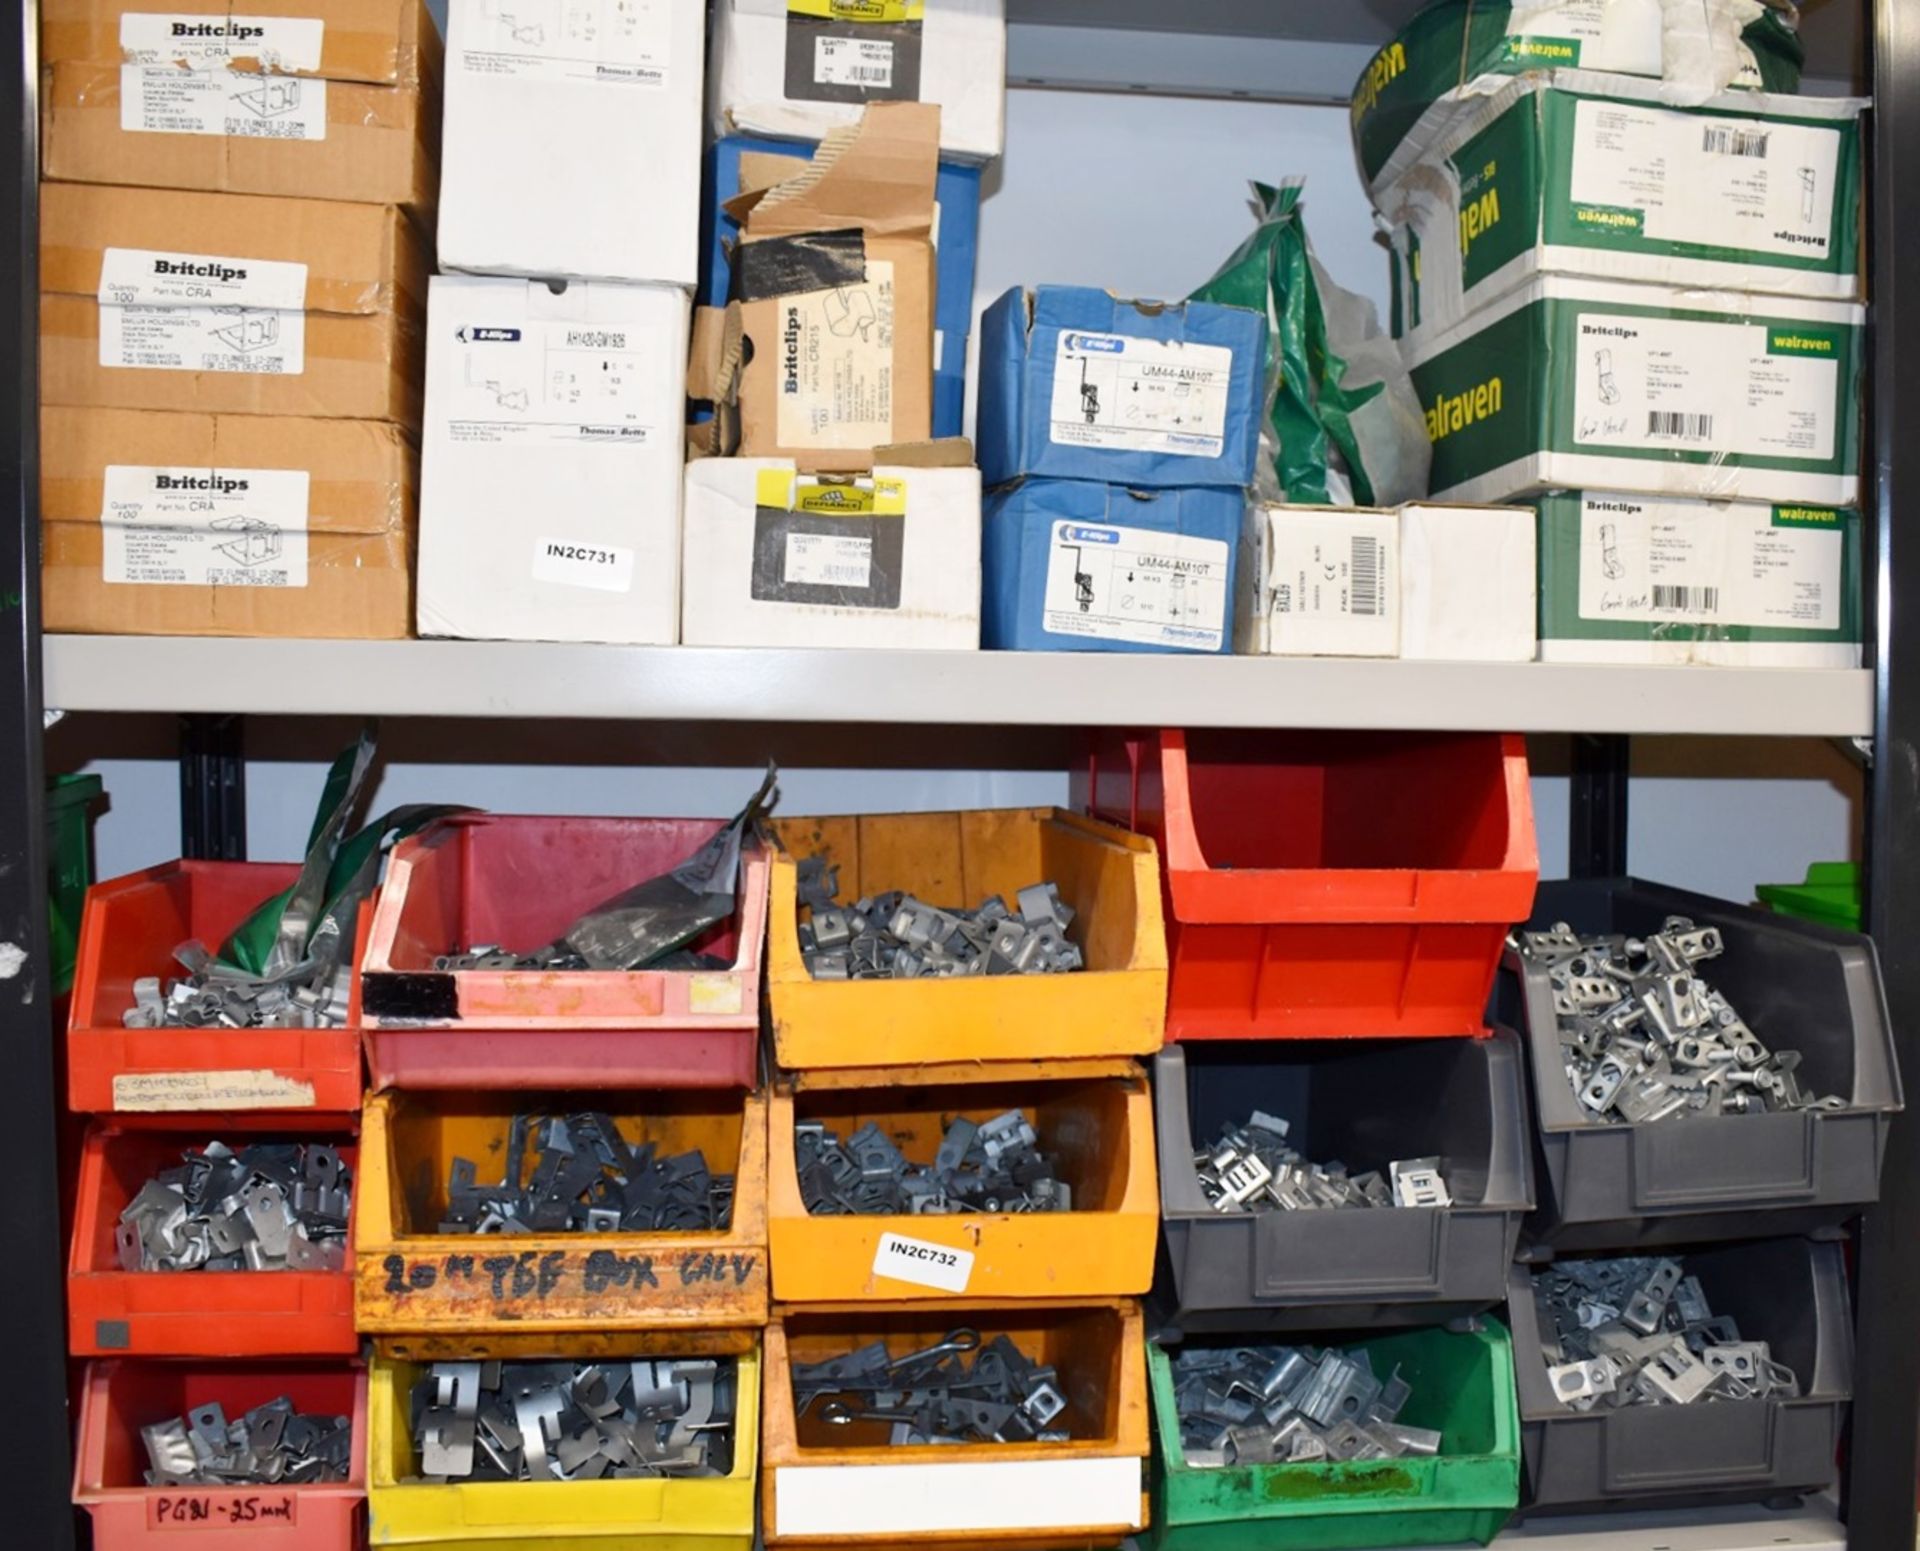 28 x Linbins With Contents & Approx 30 Boxes of Stock - Britclips, Rod Clips, Conduit Clips & More - Image 6 of 19